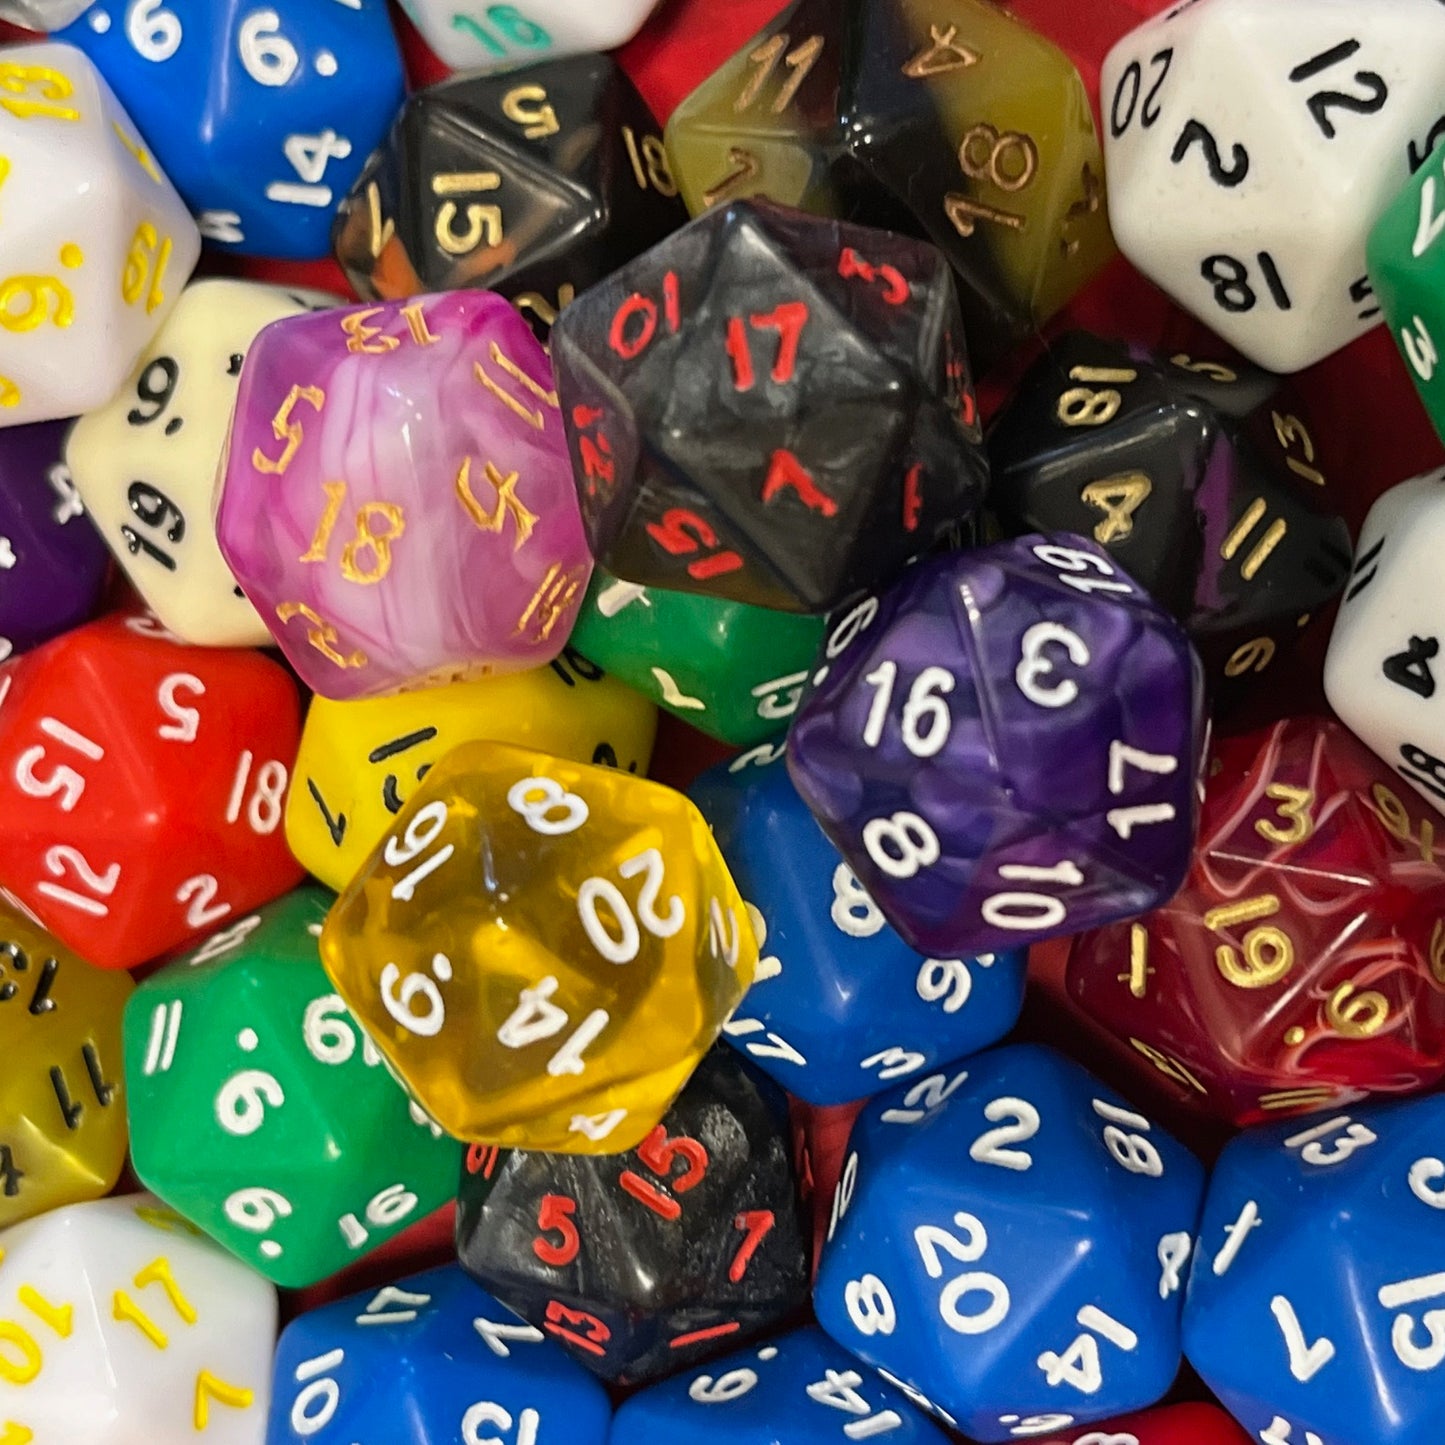 Random D20 TTRPG dice sets for DND and role playing games and dice goblin collectors